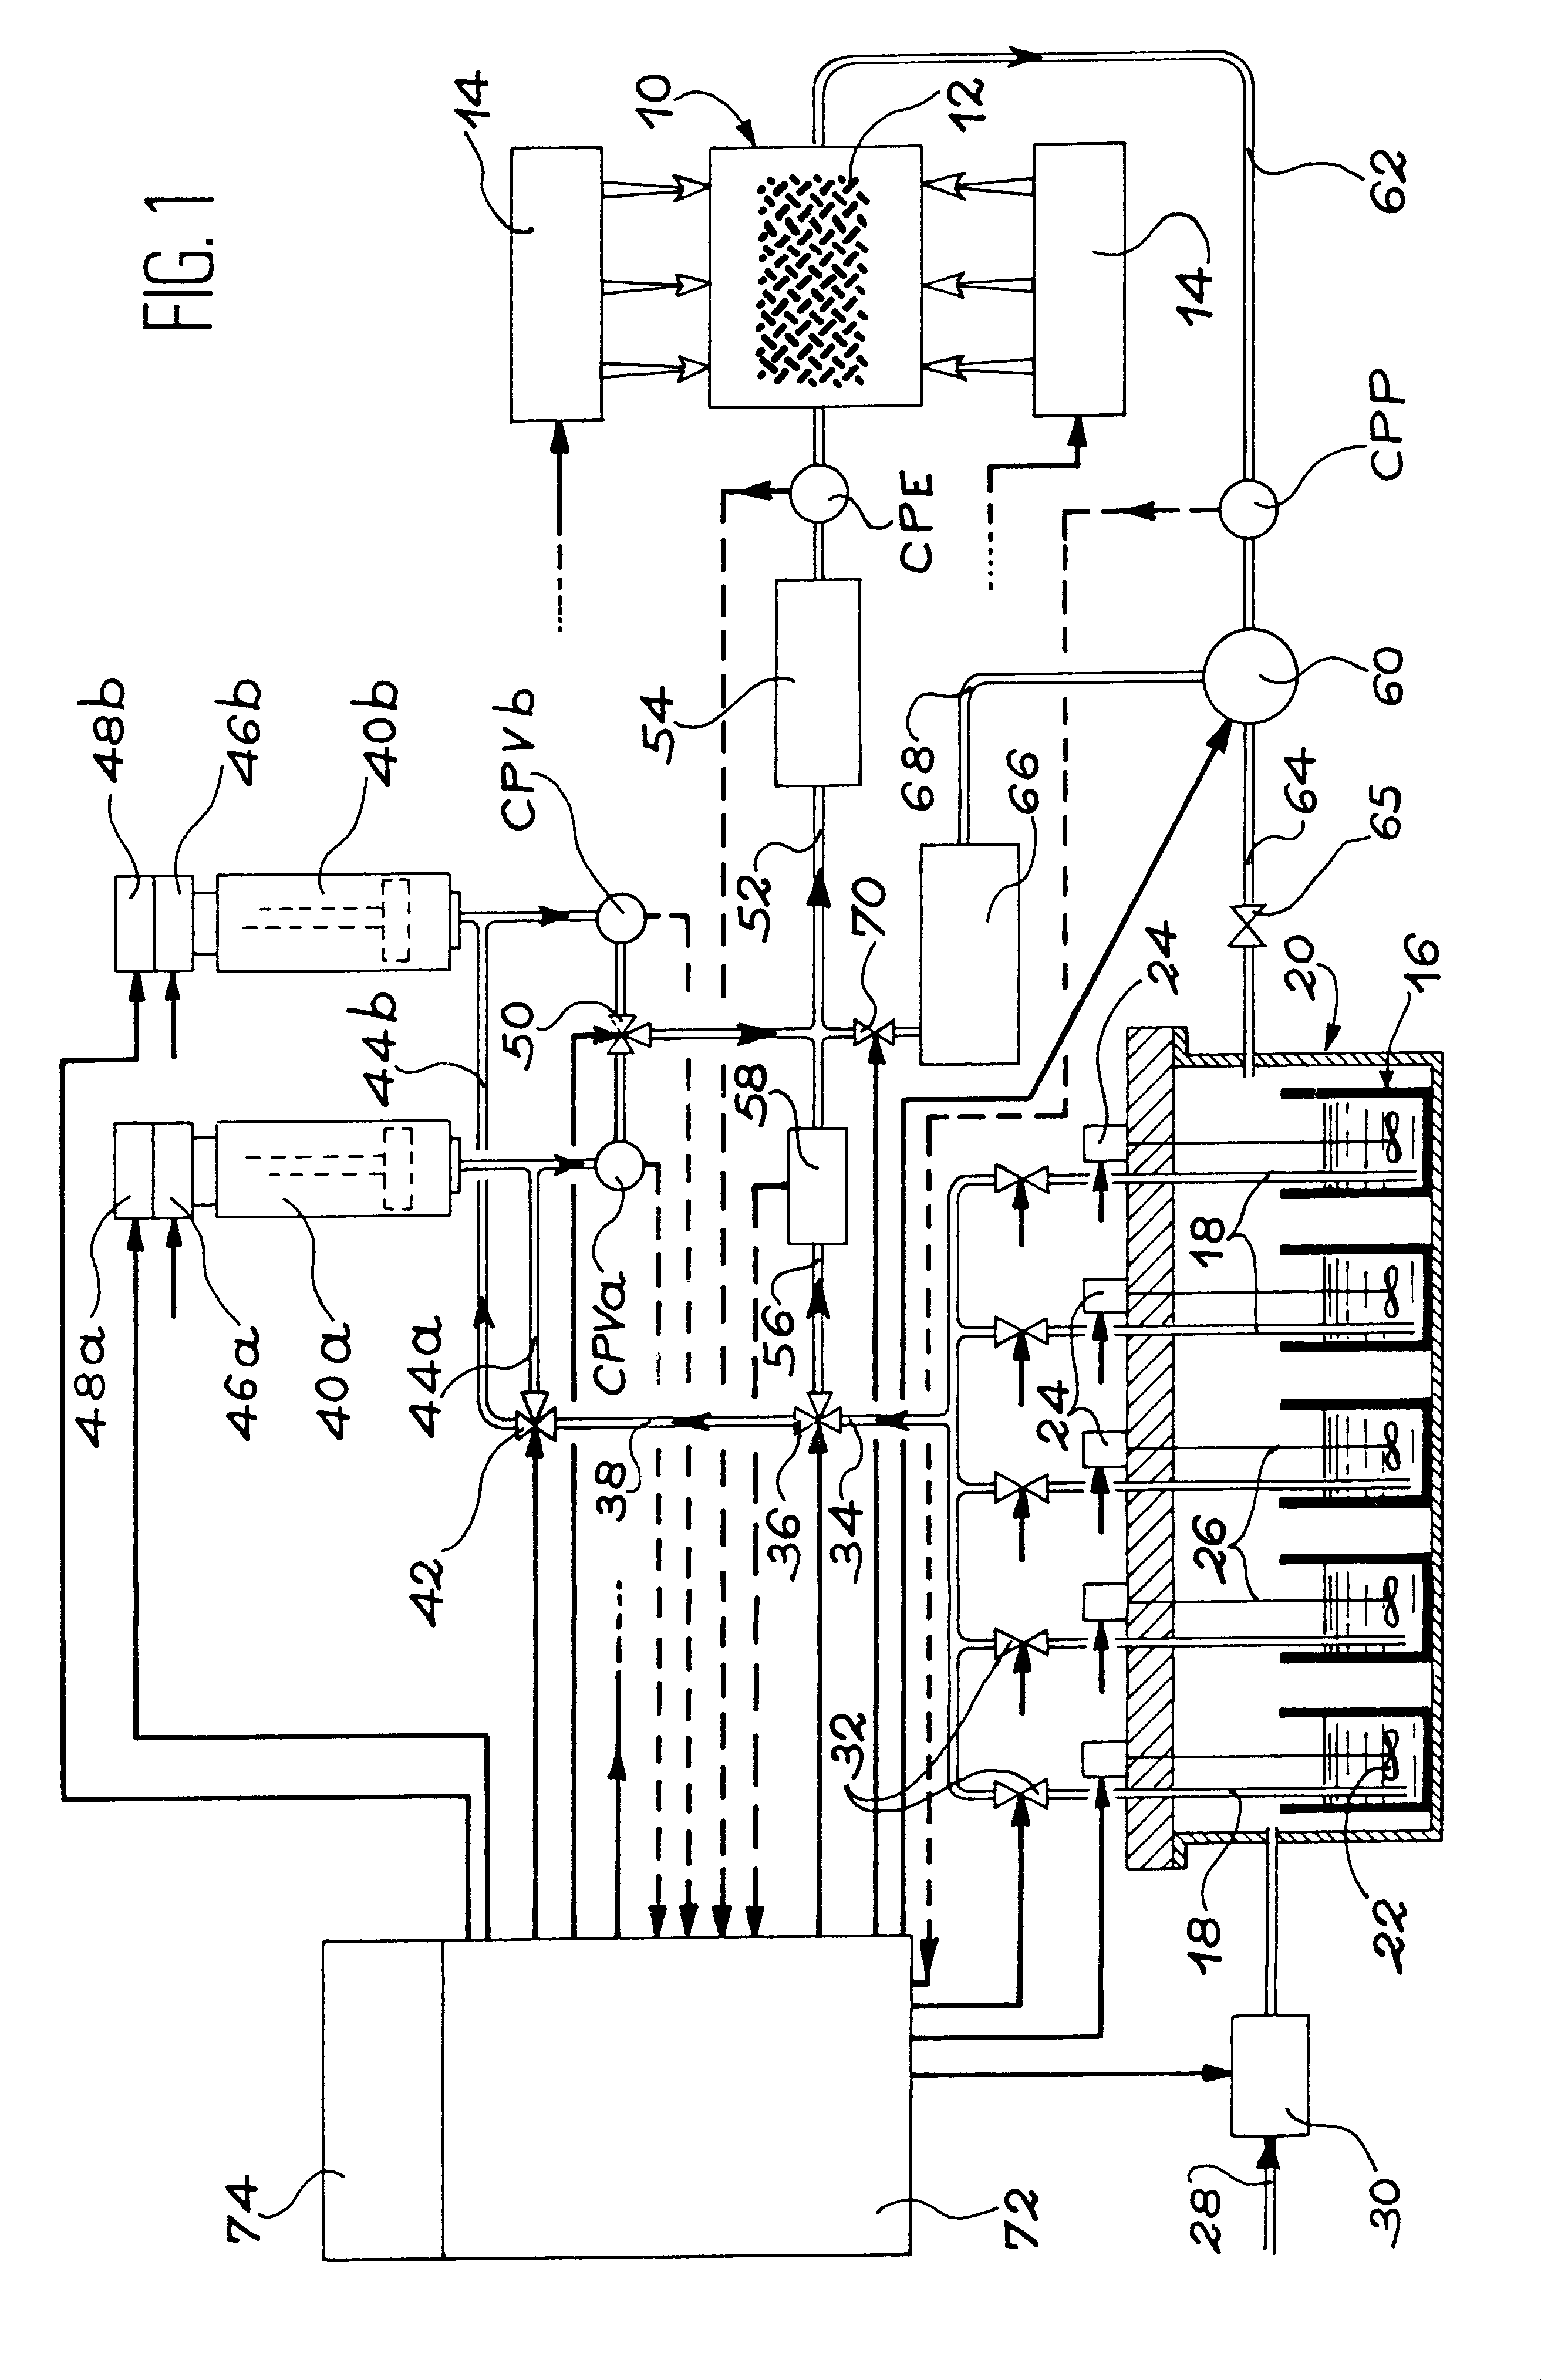 Apparatus for manufacturing composite parts produced by resin transfer molding